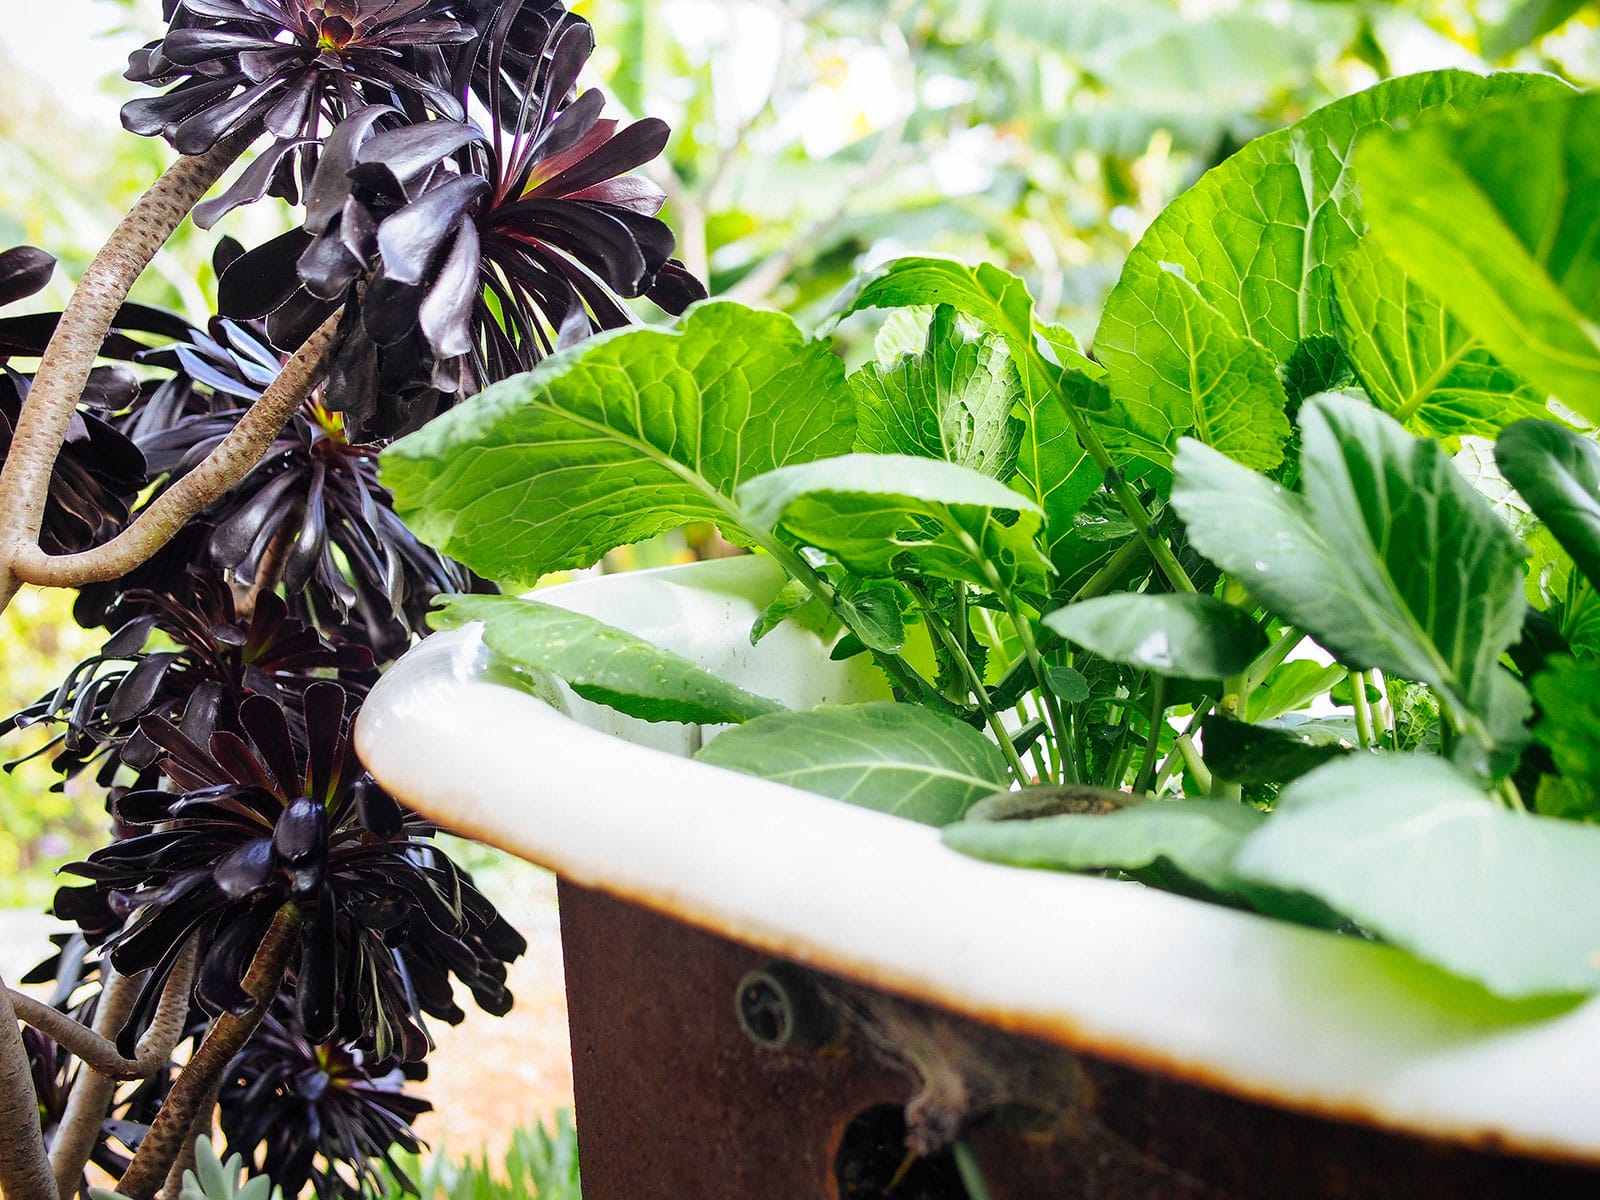 Close-up of mustard greens growing in a bathtub planter, with a black succulent plant next to it